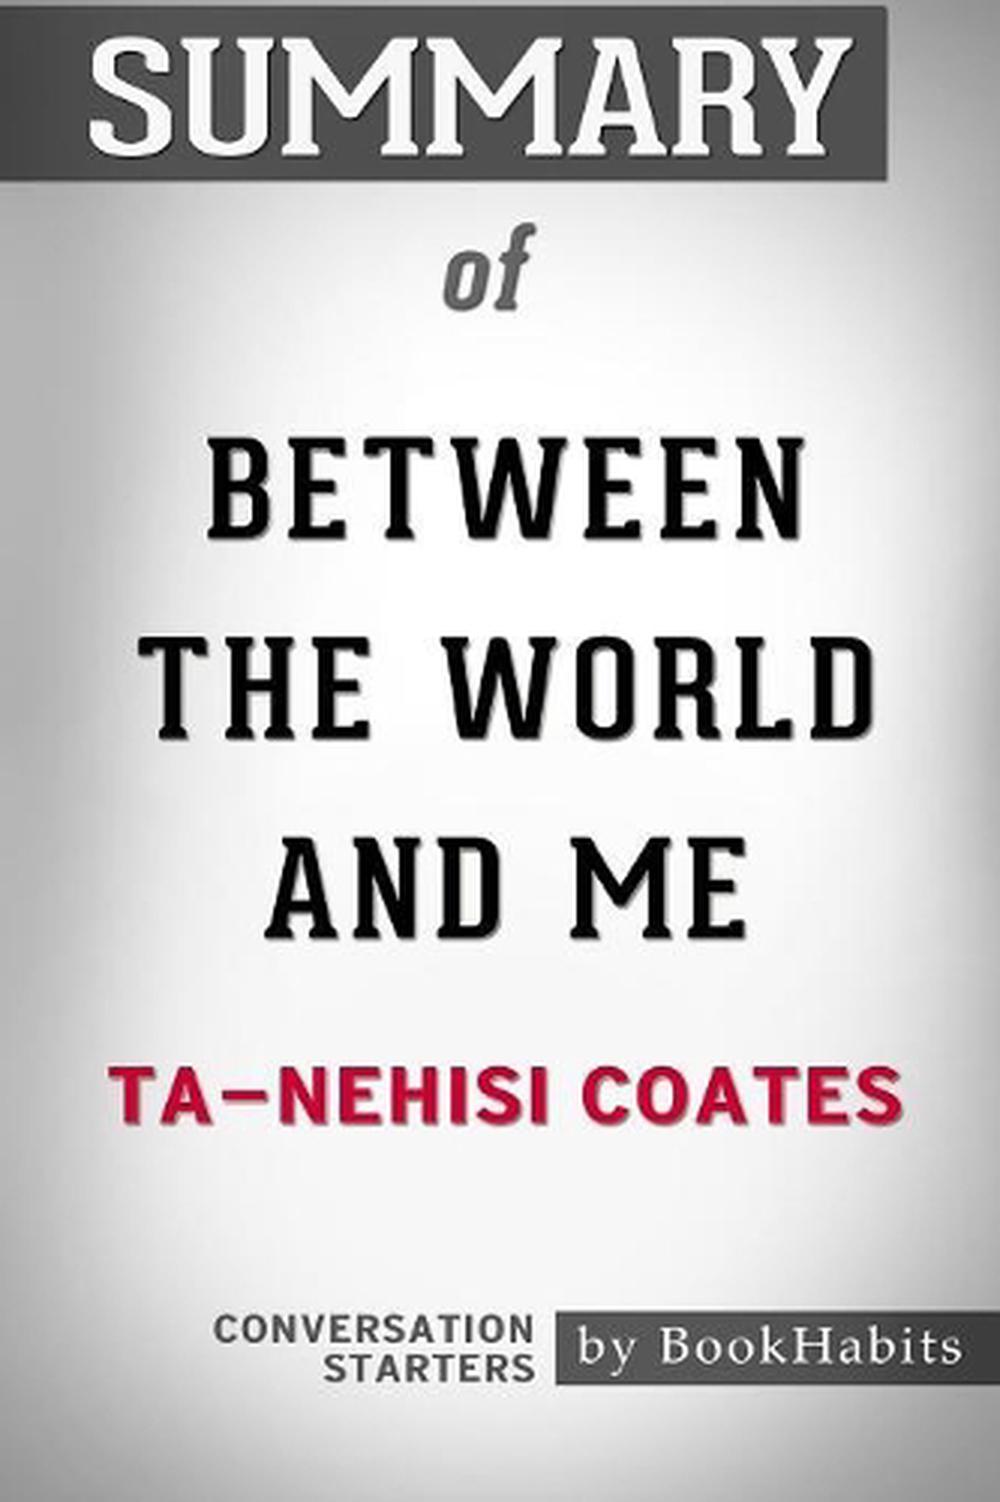 ta nehisi between the world and me